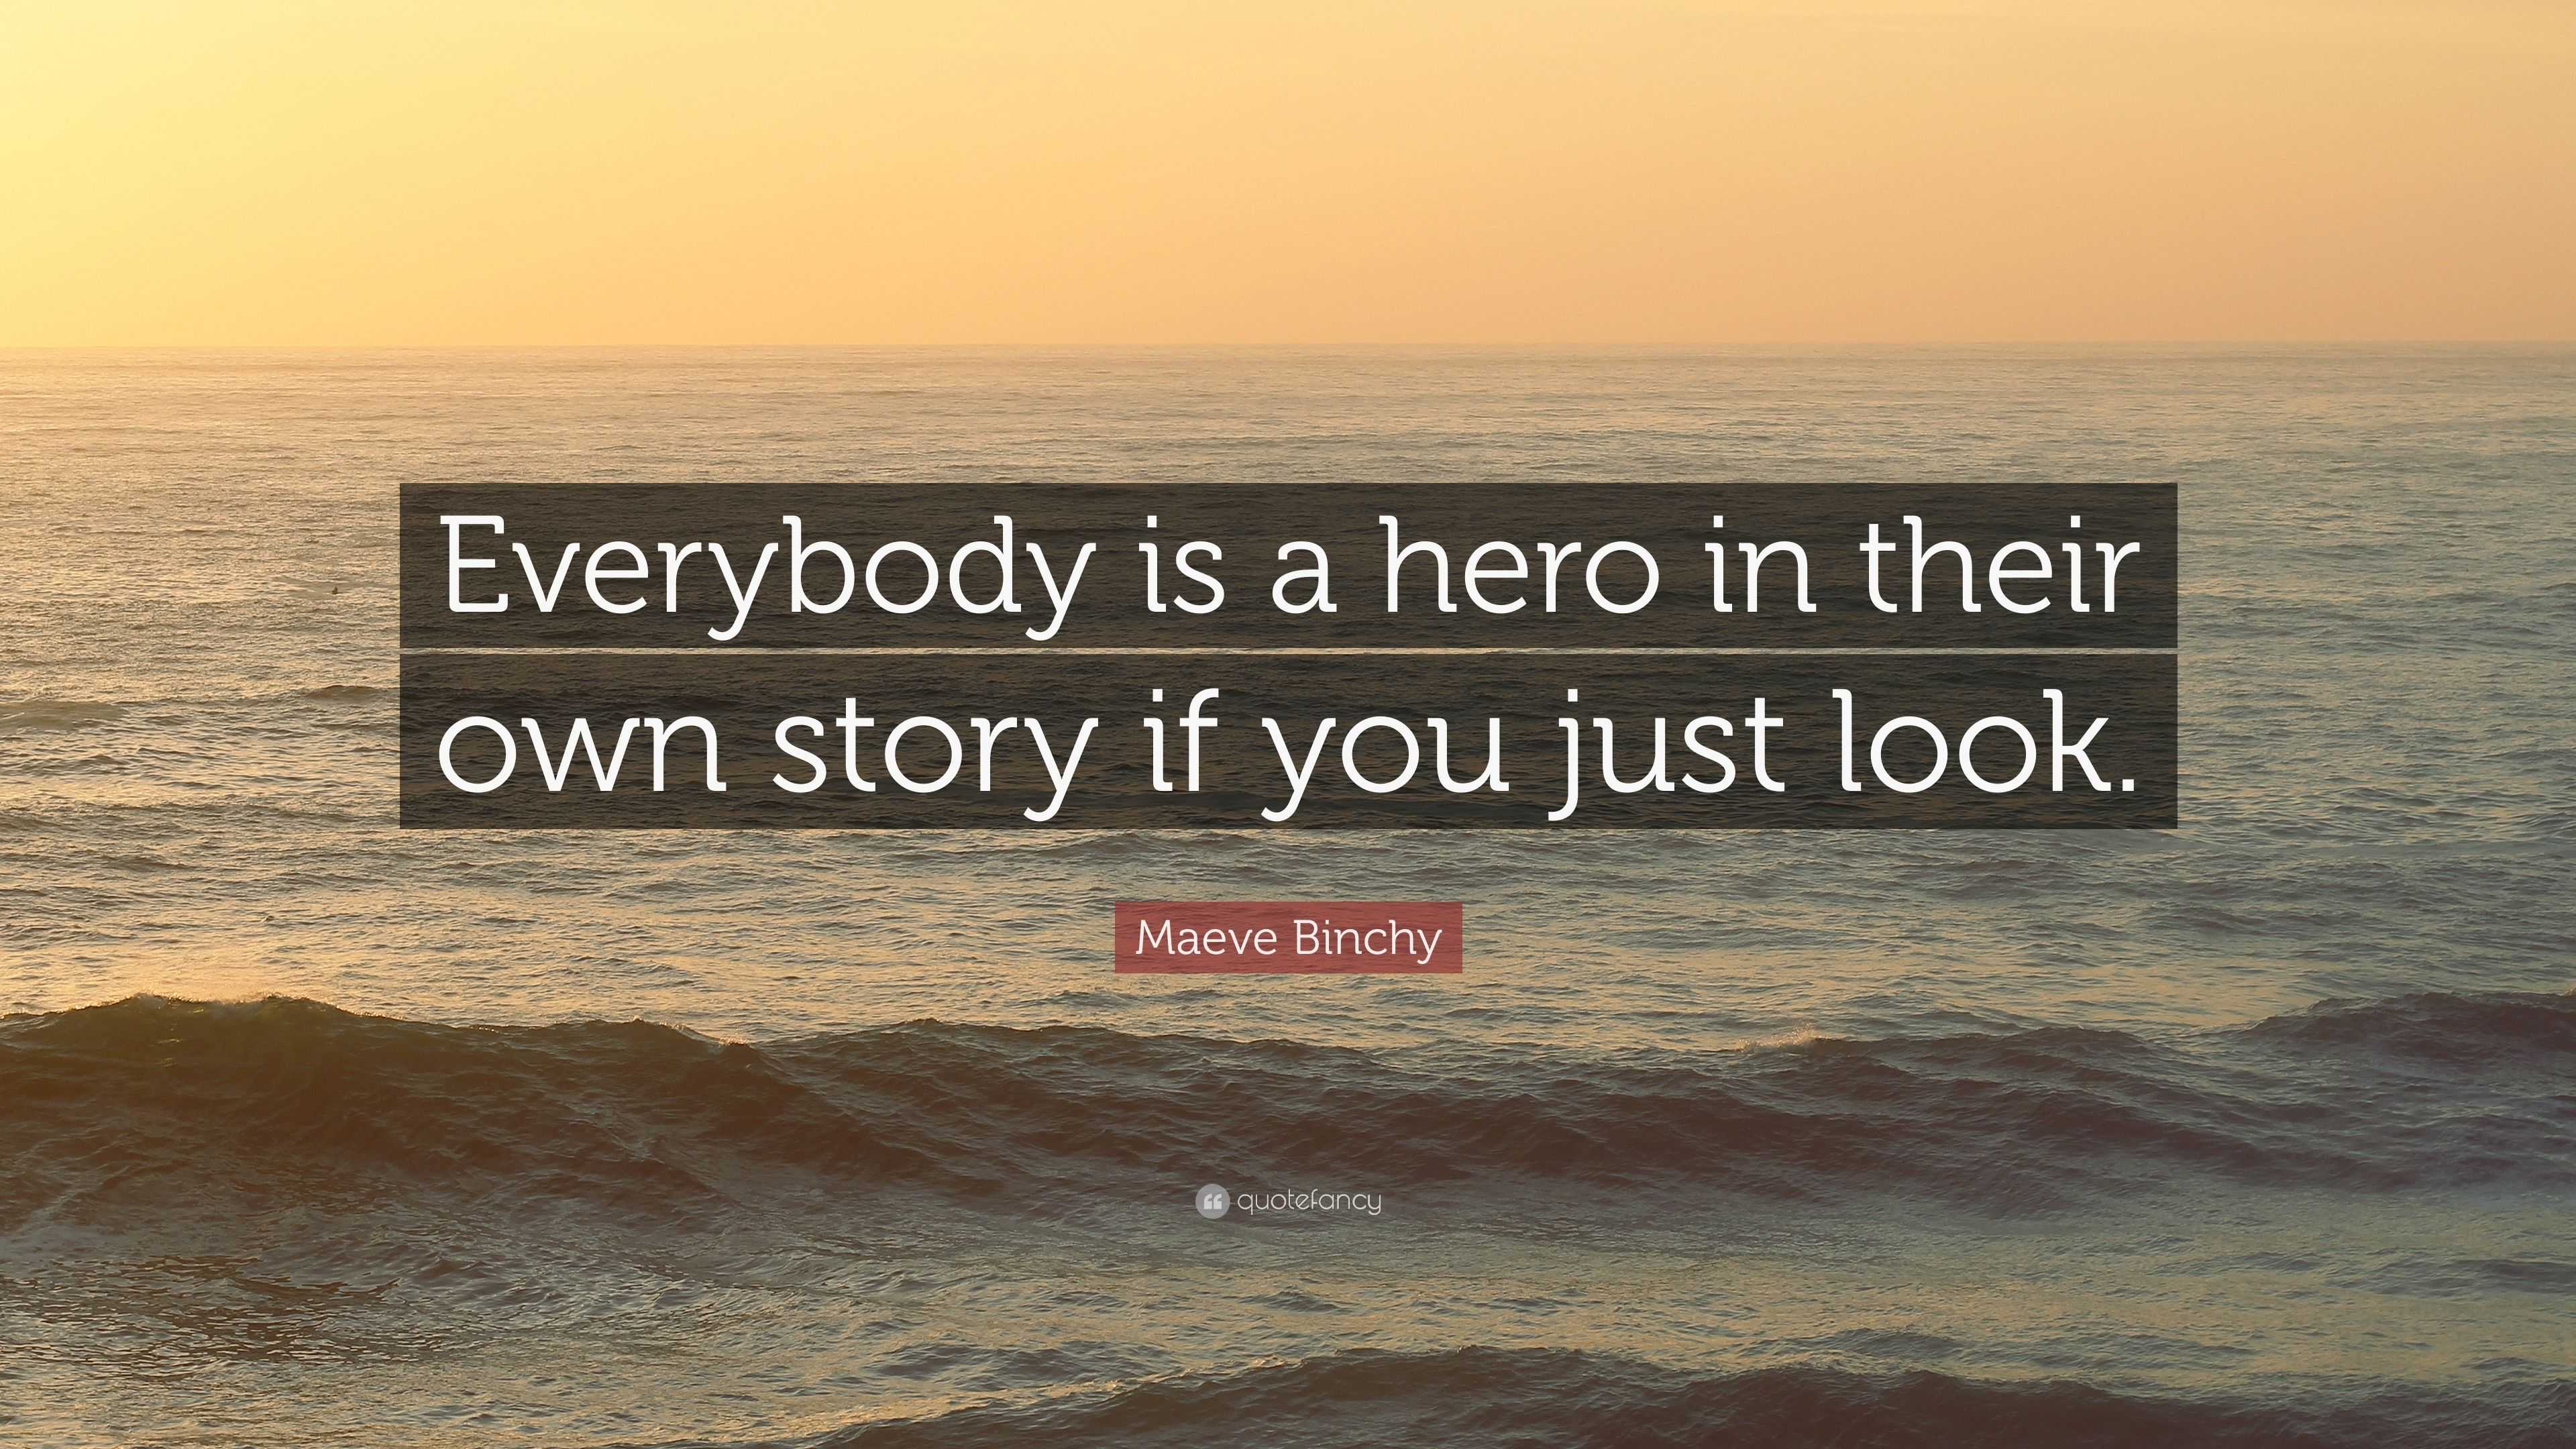 Maeve Binchy Quote “everybody Is A Hero In Their Own Story If You Just